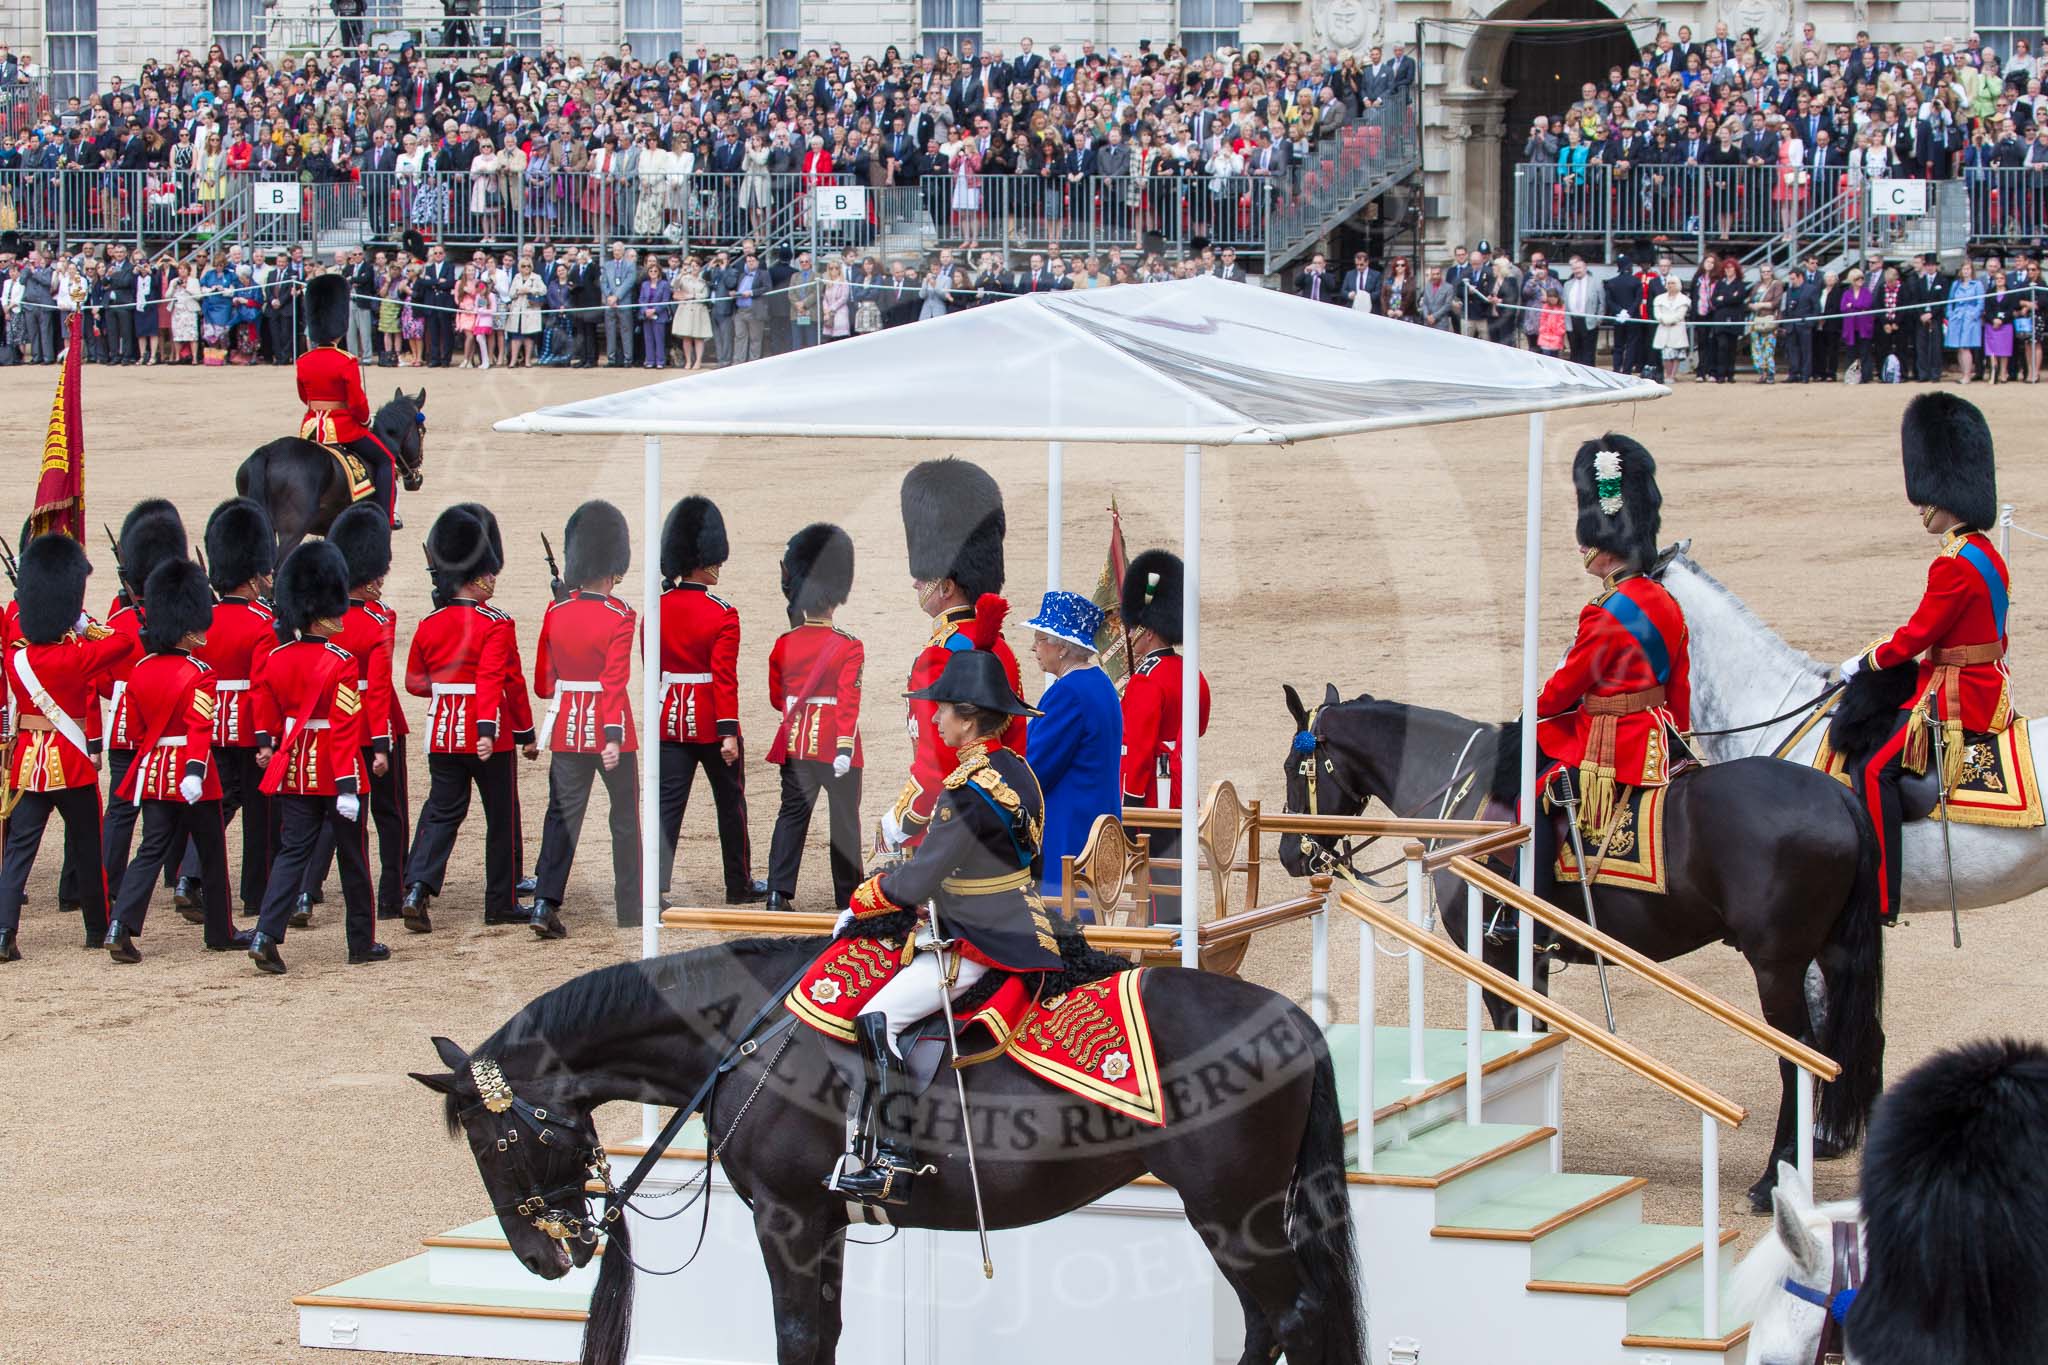 Trooping the Colour 2013: The Royal Colonels, and HRH The Duke of Kent and HM The Queen are standing on the dais, during the March Past. Image #606, 15 June 2013 11:45 Horse Guards Parade, London, UK